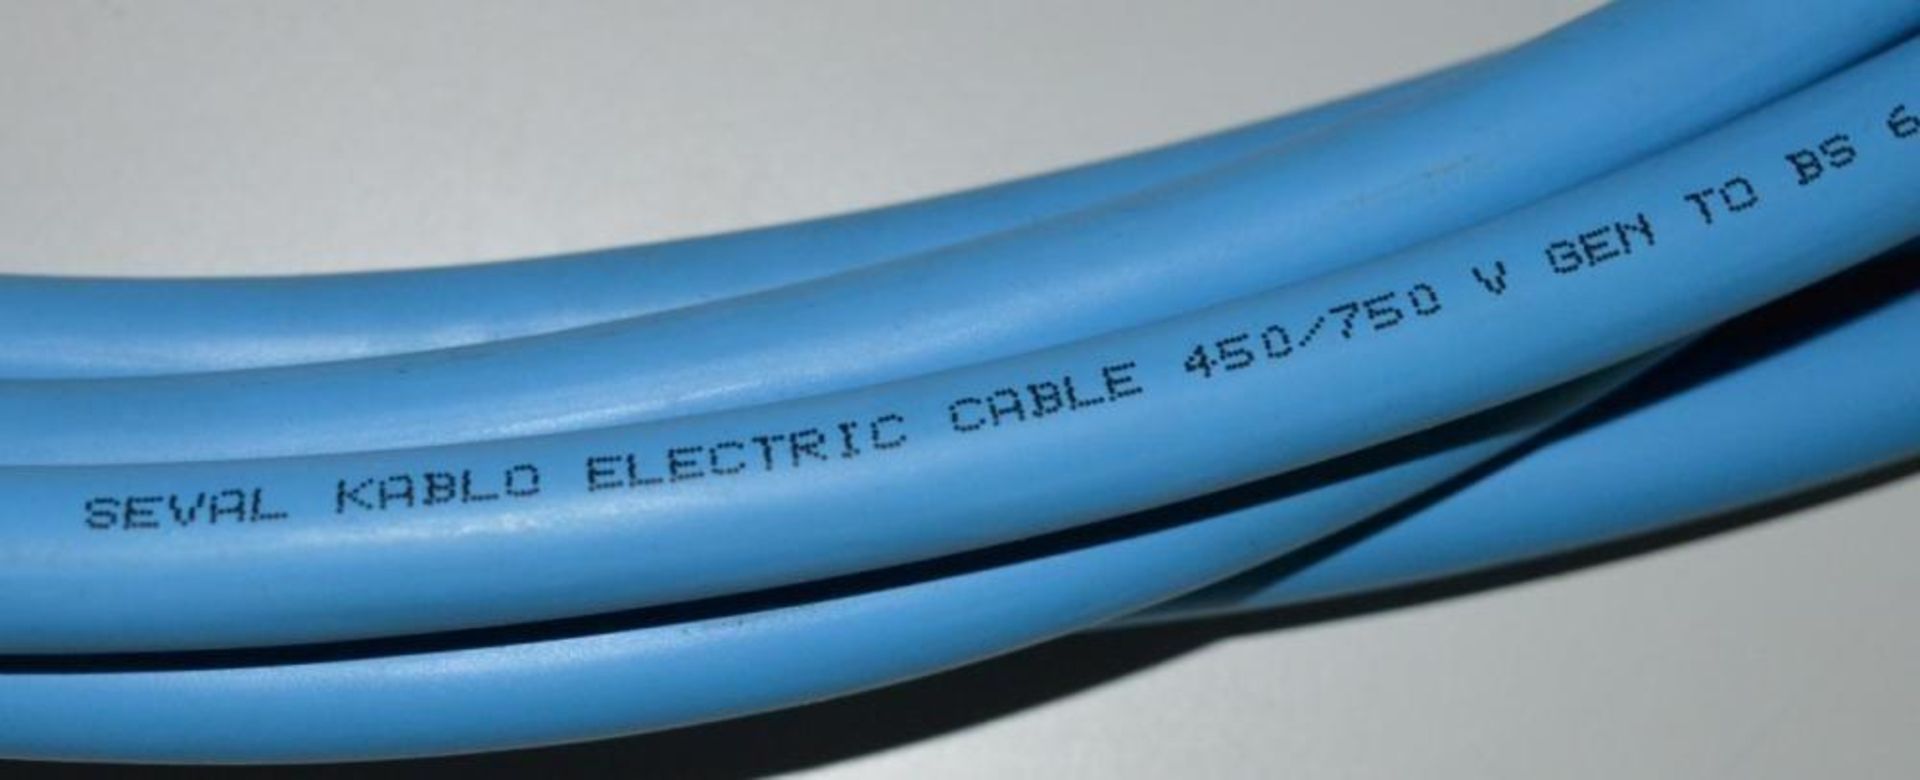 10 x Meters of Seval Kablo Insulated Electric Cable 450/750v - Unused - CL300 - Ref PC588 - - Image 3 of 6